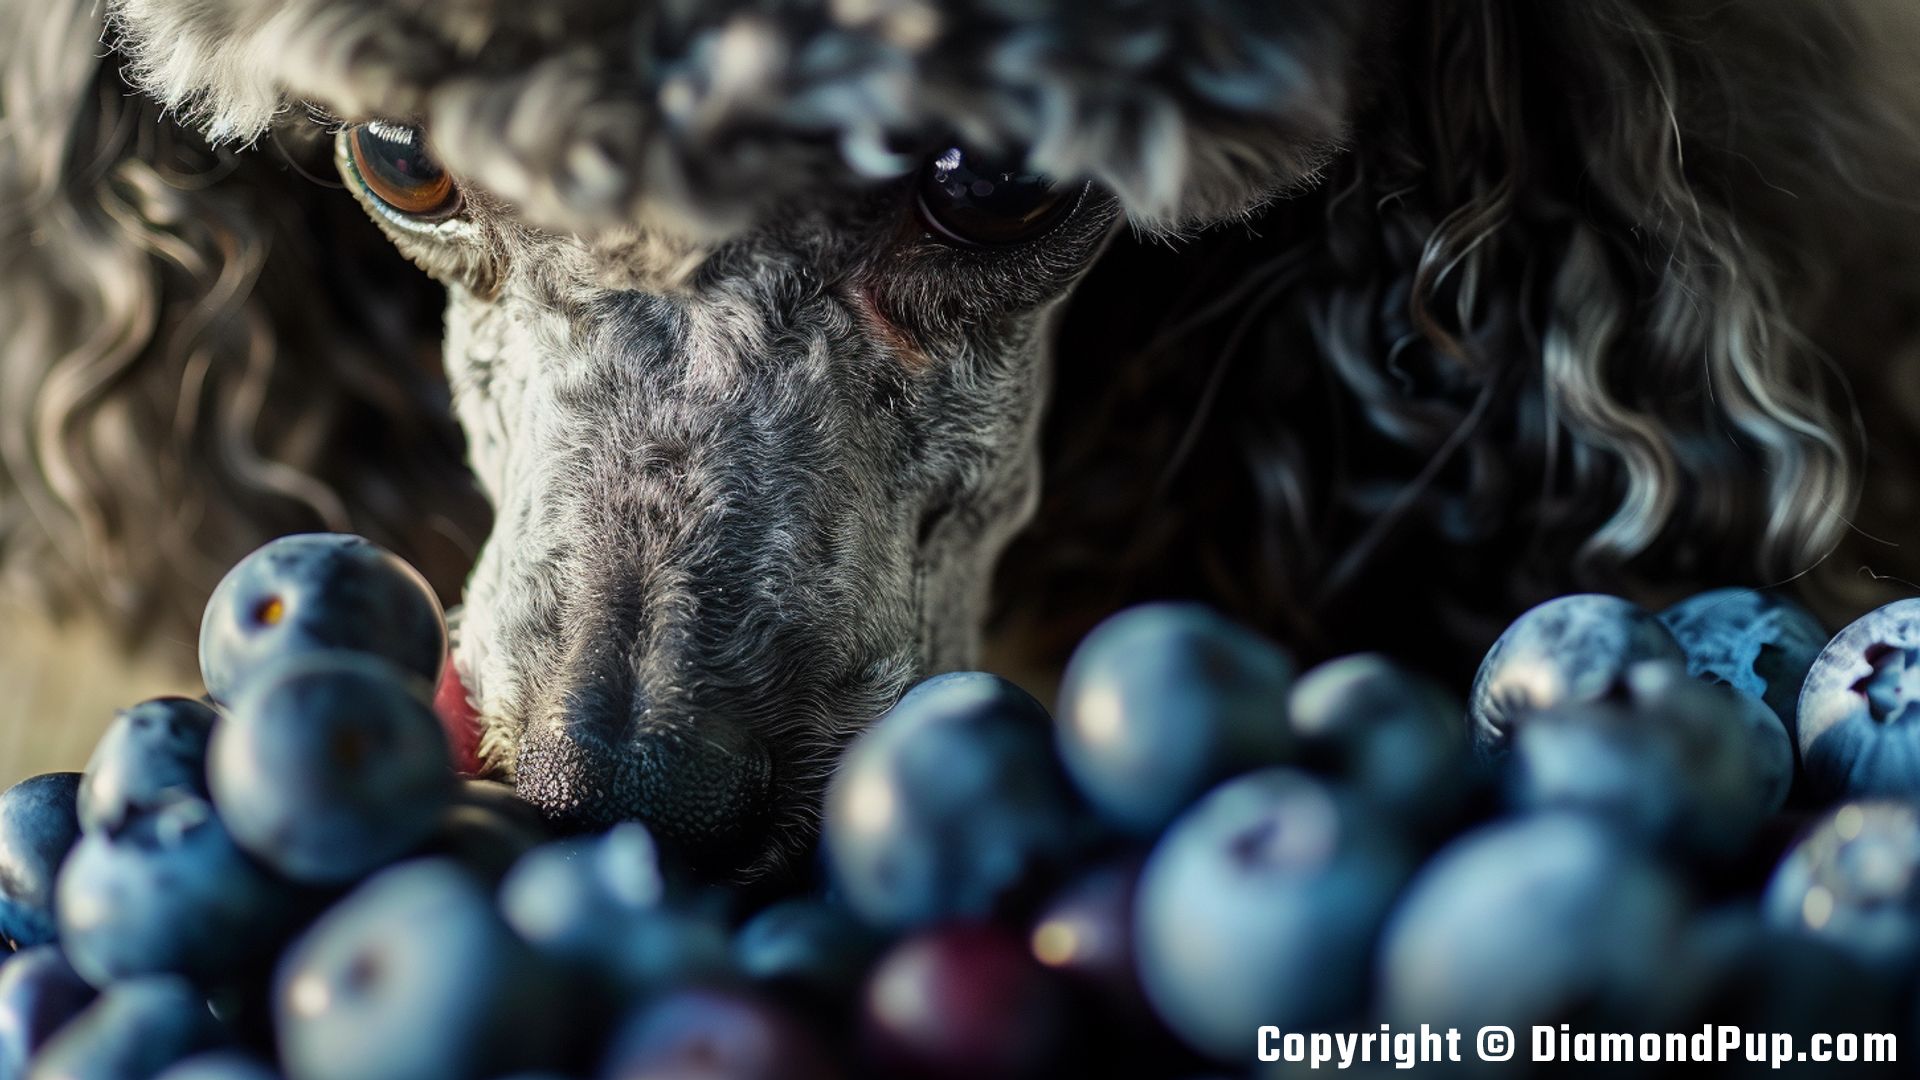 Photograph of a Happy Poodle Snacking on Blueberries